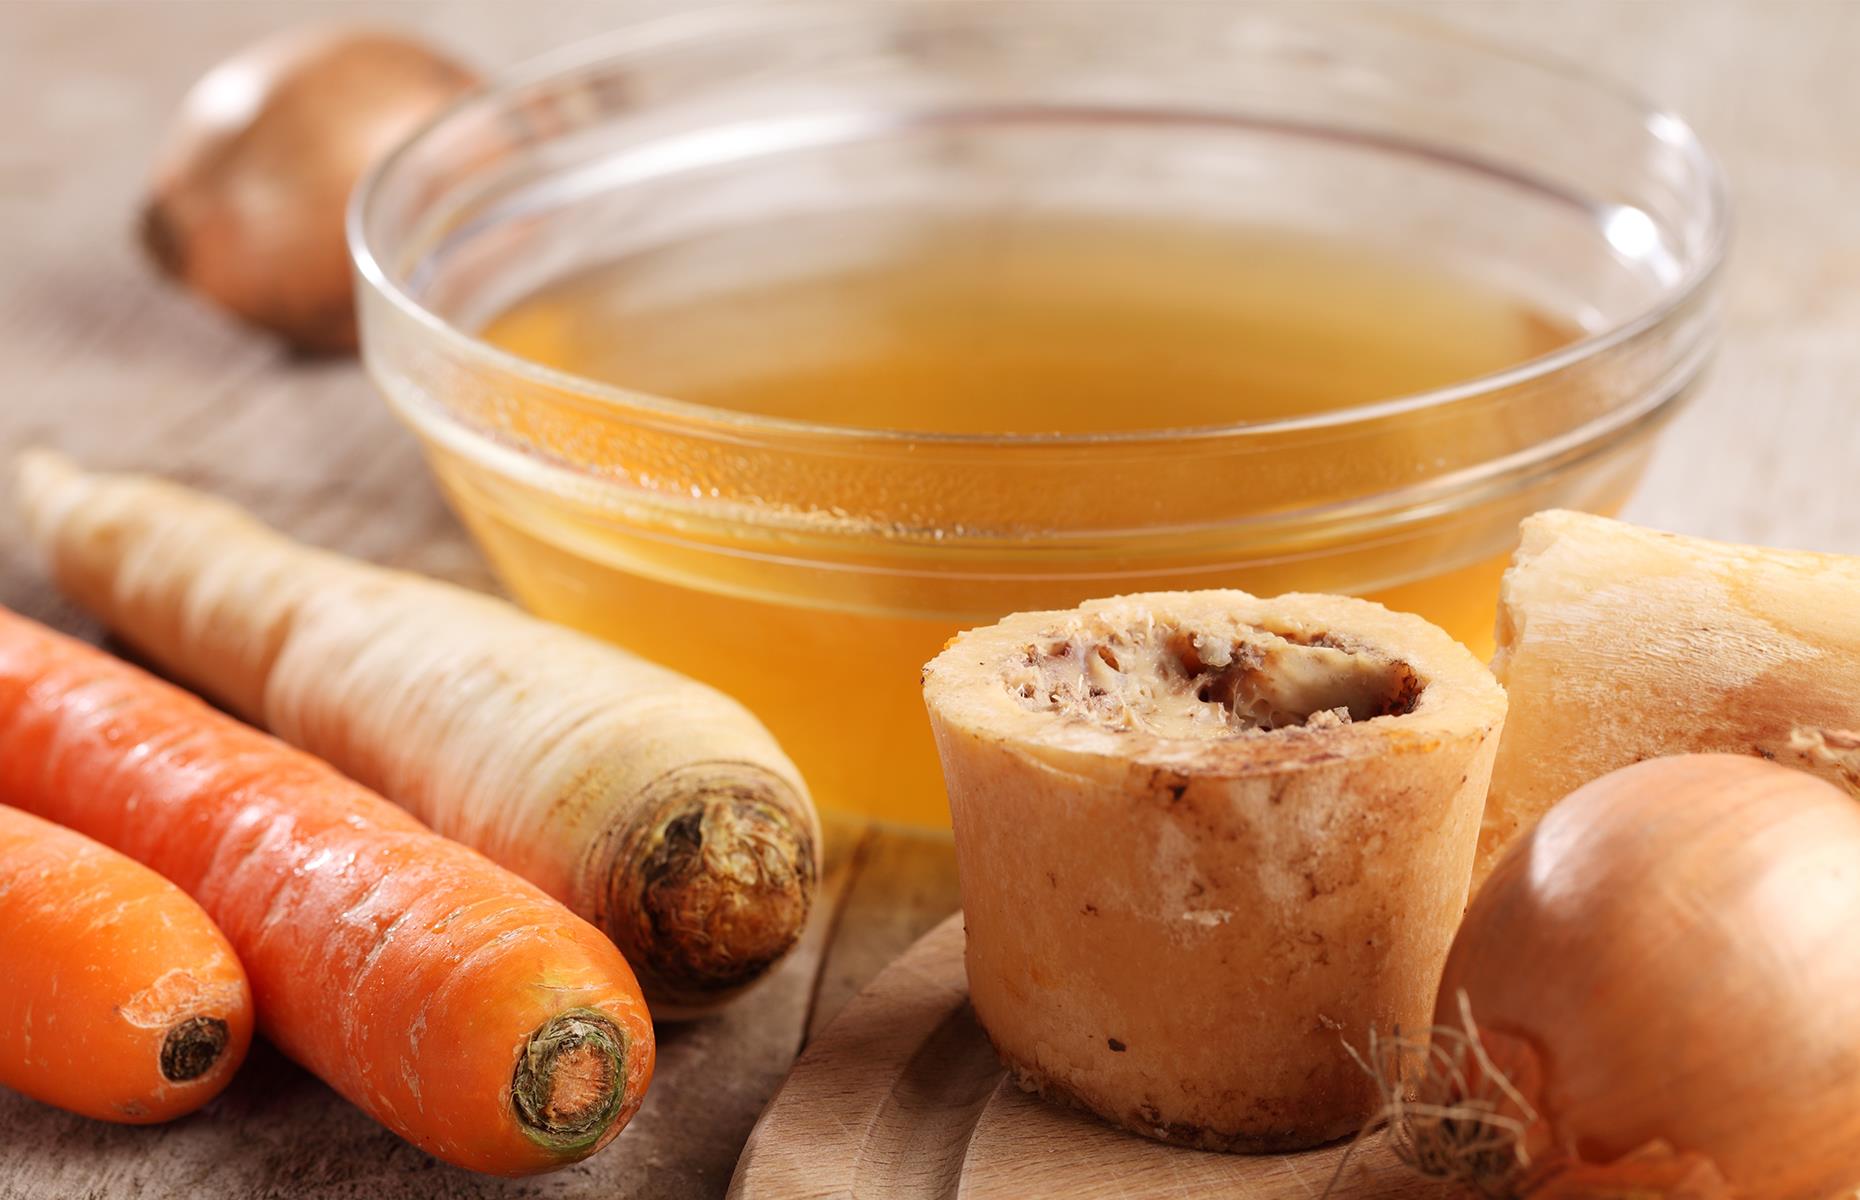 <p>Today, bone broth is revered by health food fanatics and paleo dieters, but it has a very long history indeed. The nutrient-packed broth is made by simmering leftover bones in water, often with vinegar and/or herbs and spices. Despite its modern popularity, it's thought to have originated with hunter-gatherer tribes in <a href="https://www.nytimes.com/2015/01/07/dining/bone-broth-evolves-from-prehistoric-food-to-paleo-drink.html">the late Stone Age</a>.</p>